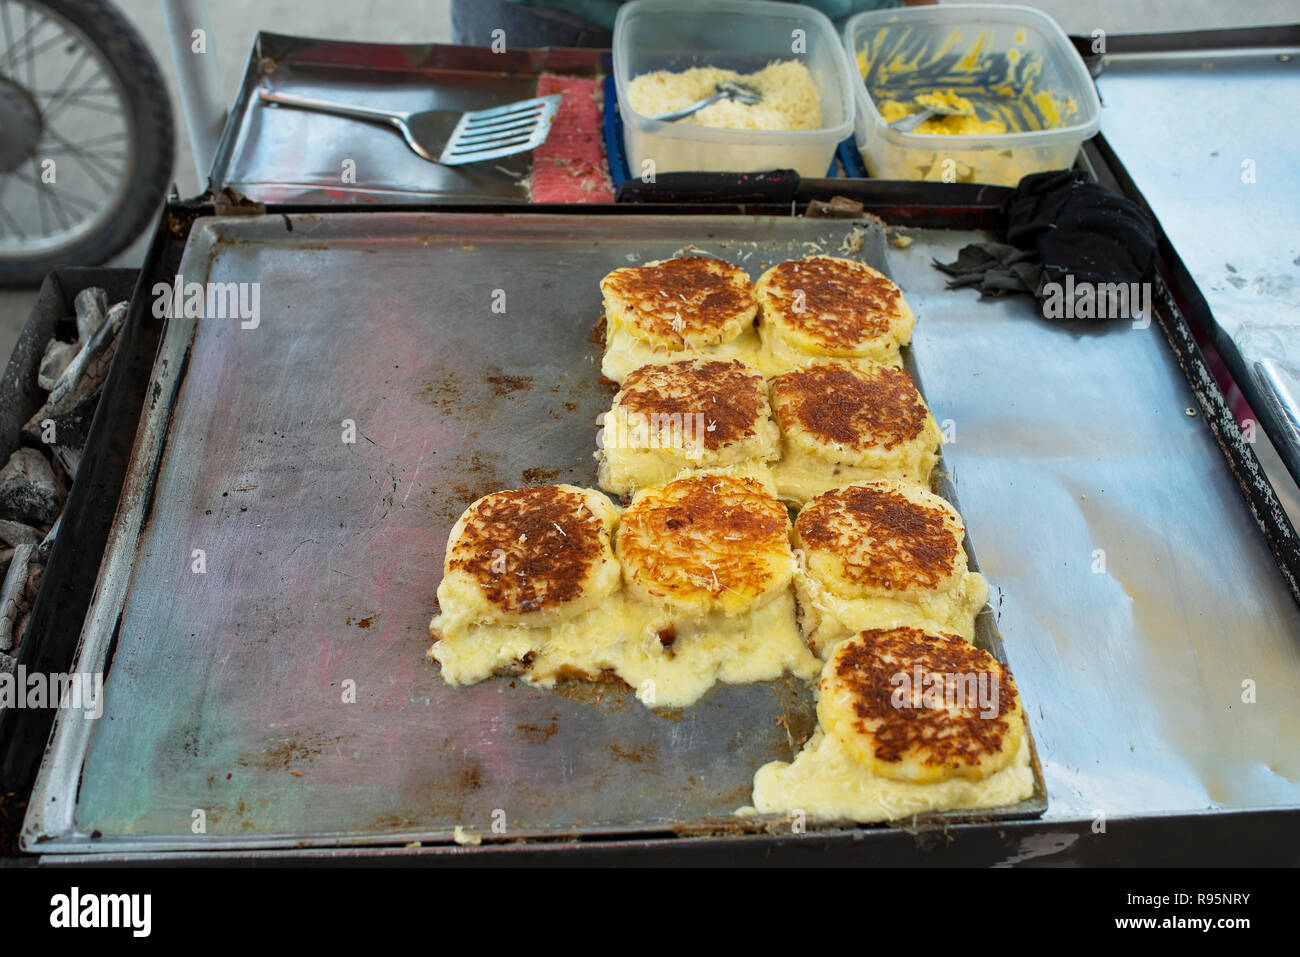 https://c8.alamy.com/comp/R95NRY/cheese-topped-arepas-traditional-colombian-corn-flour-food-for-sale-on-a-street-food-truck-on-bazurto-market-cartagena-de-indias-colombia-R95NRY.jpg